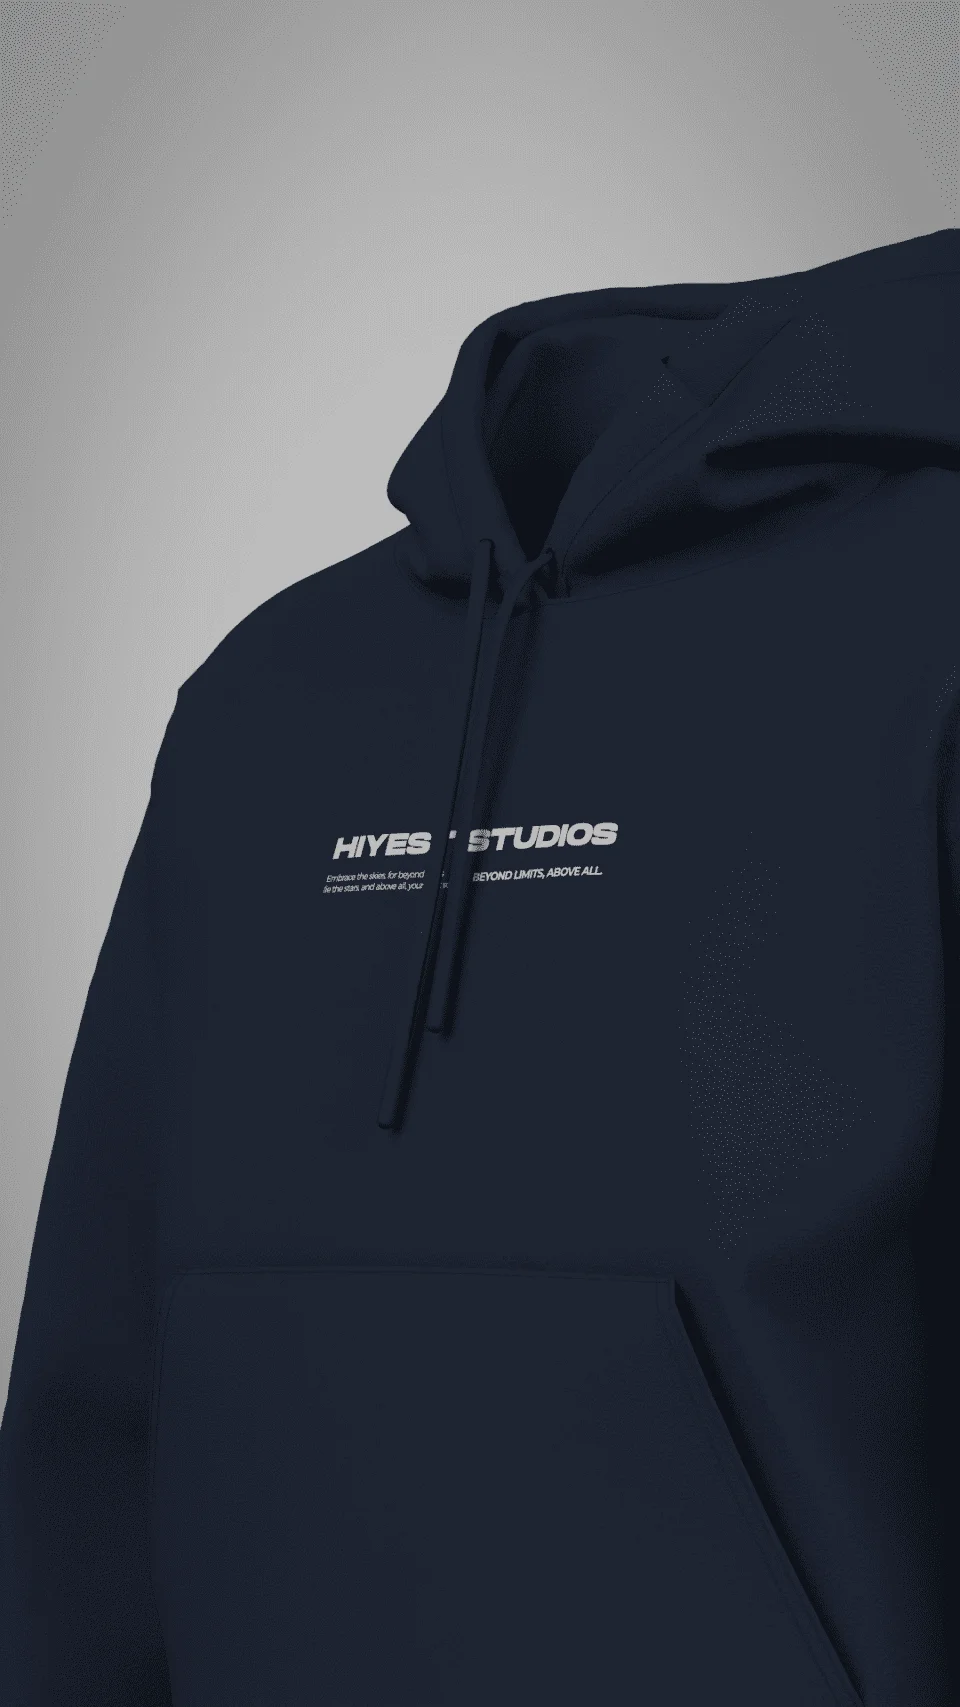 buy navy category on sale, top-rated solid navy category: hiyest studios, premium navy oversized hoodie for men & women, category  online, navy category, category store near me, navy navy category